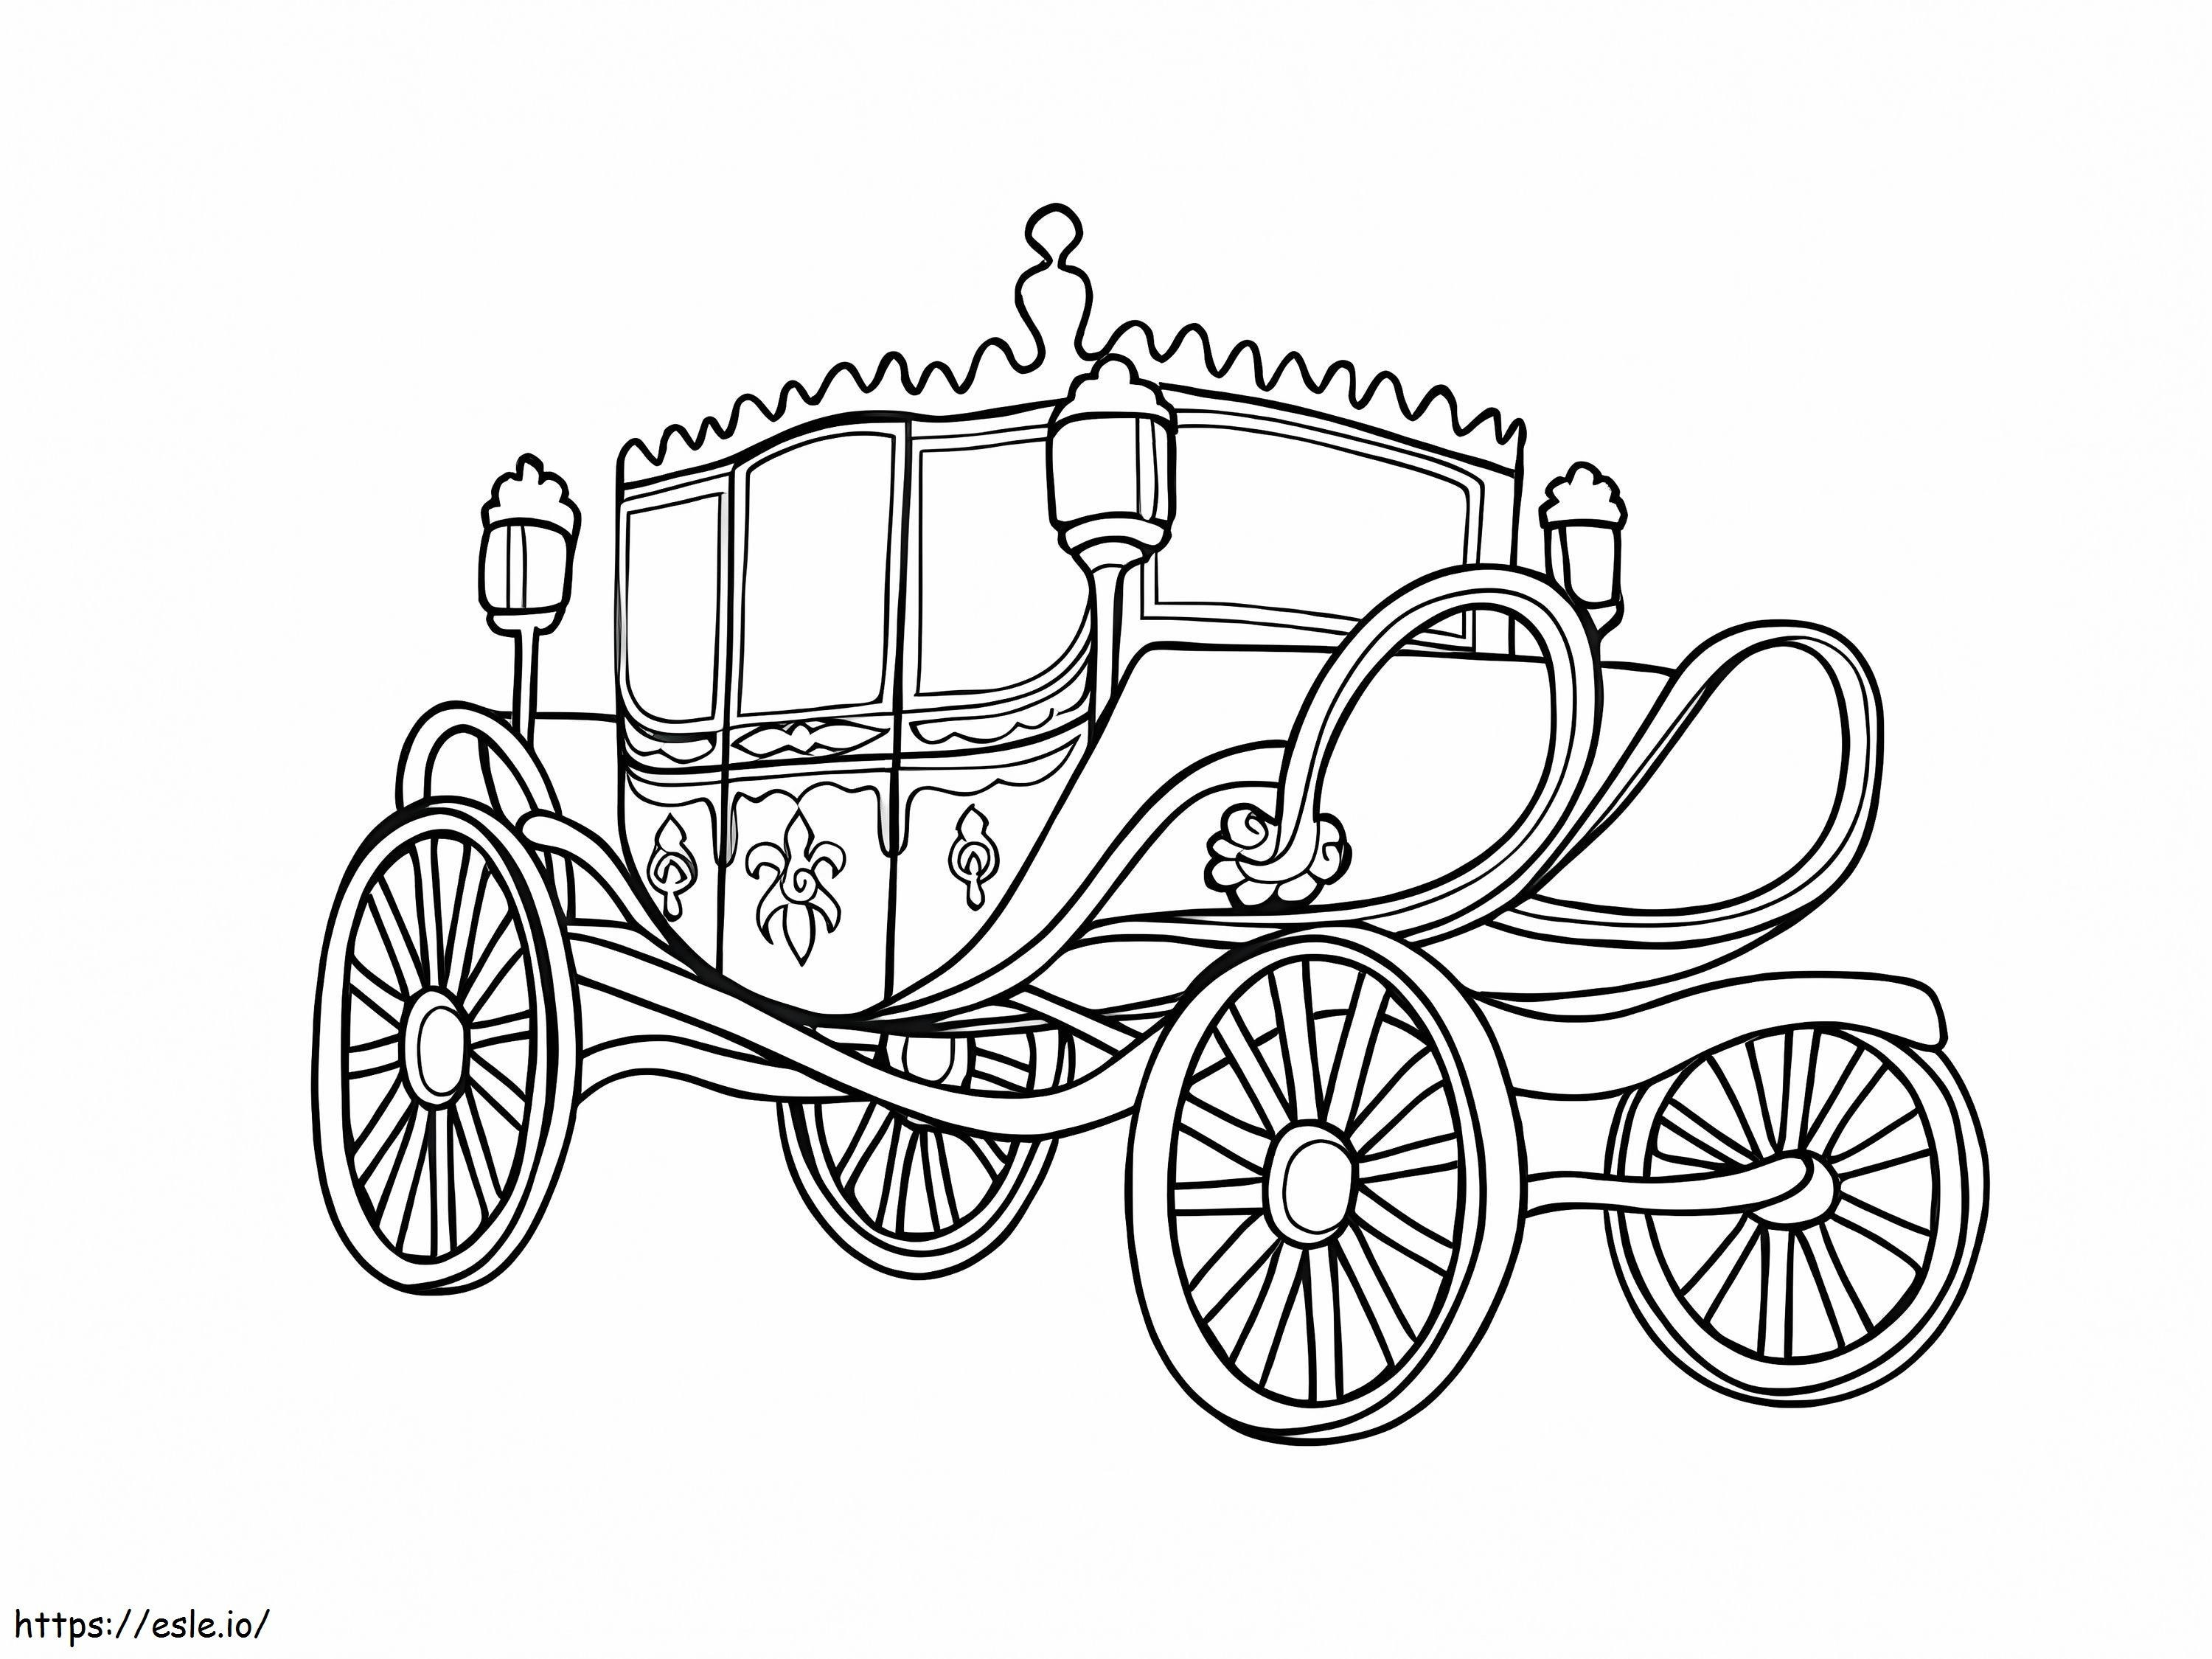 A Carriage coloring page